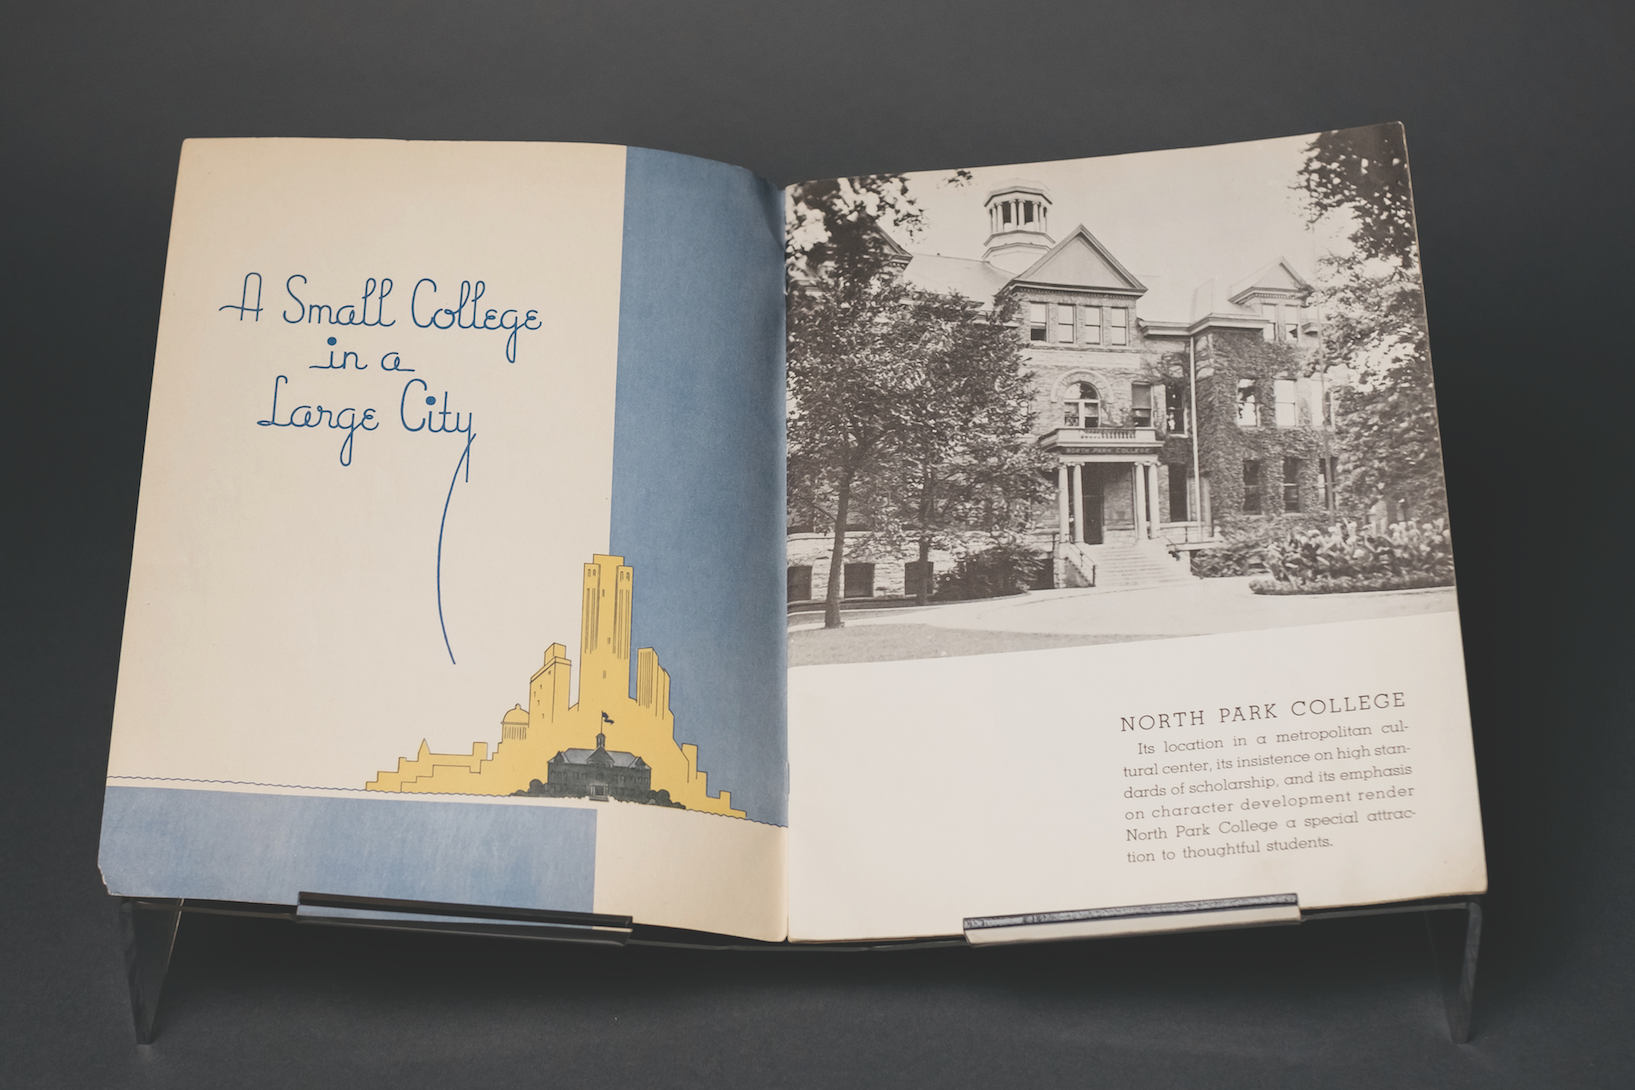 The inside of a North Park College promotional pamphlet circa mid 1930s. Interestingly, the brochure shows how North Park was engaging the city of Chicago nearly 100 years ago.